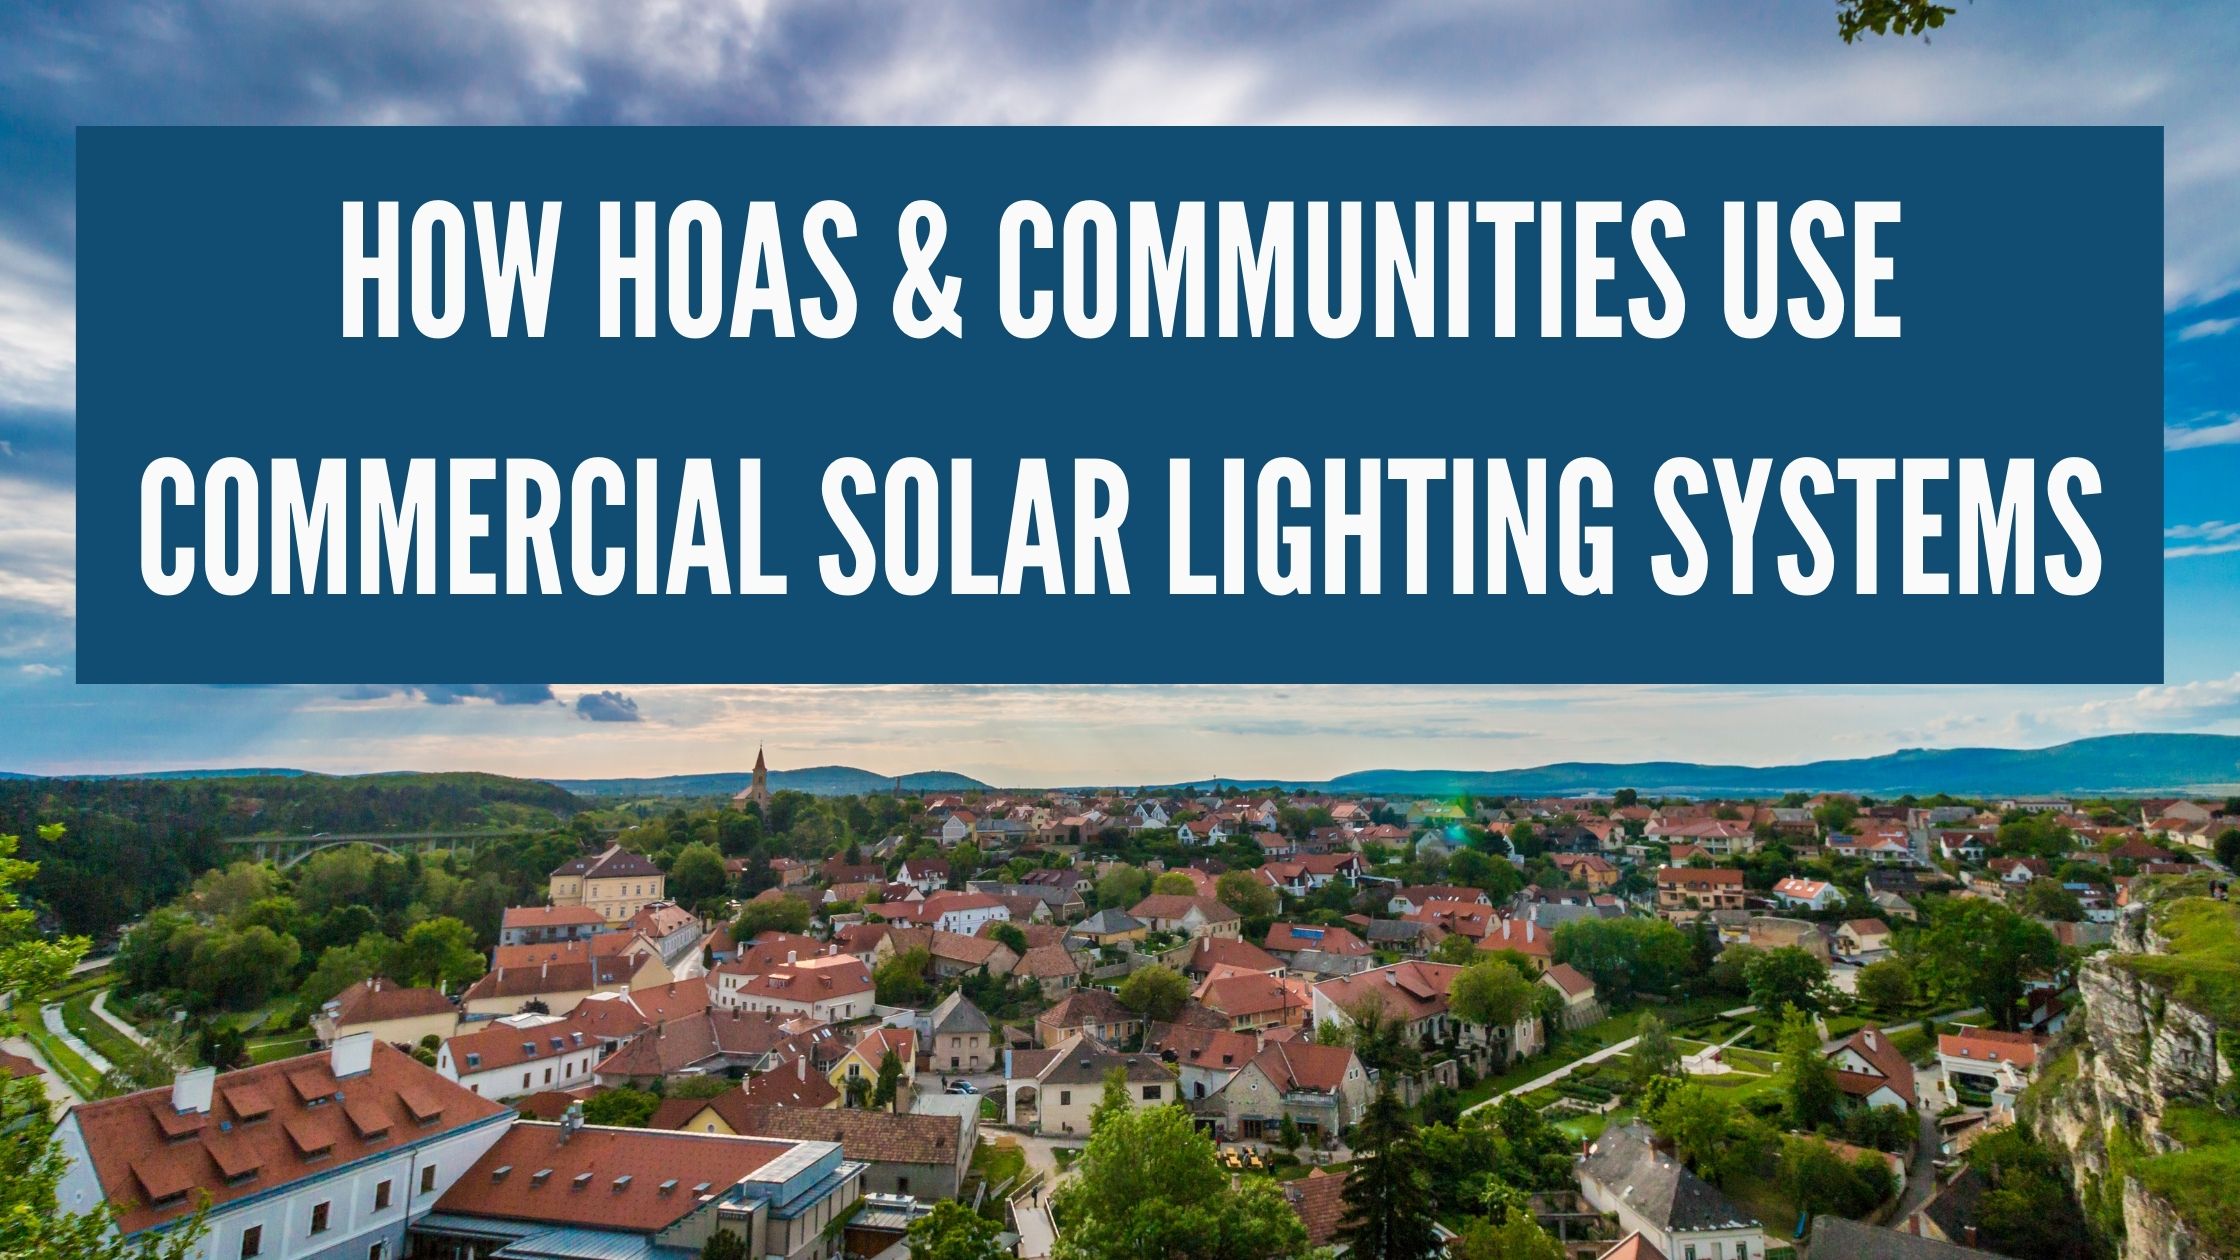 How HOAs & Communities Use Commercial Solar Lighting Systems